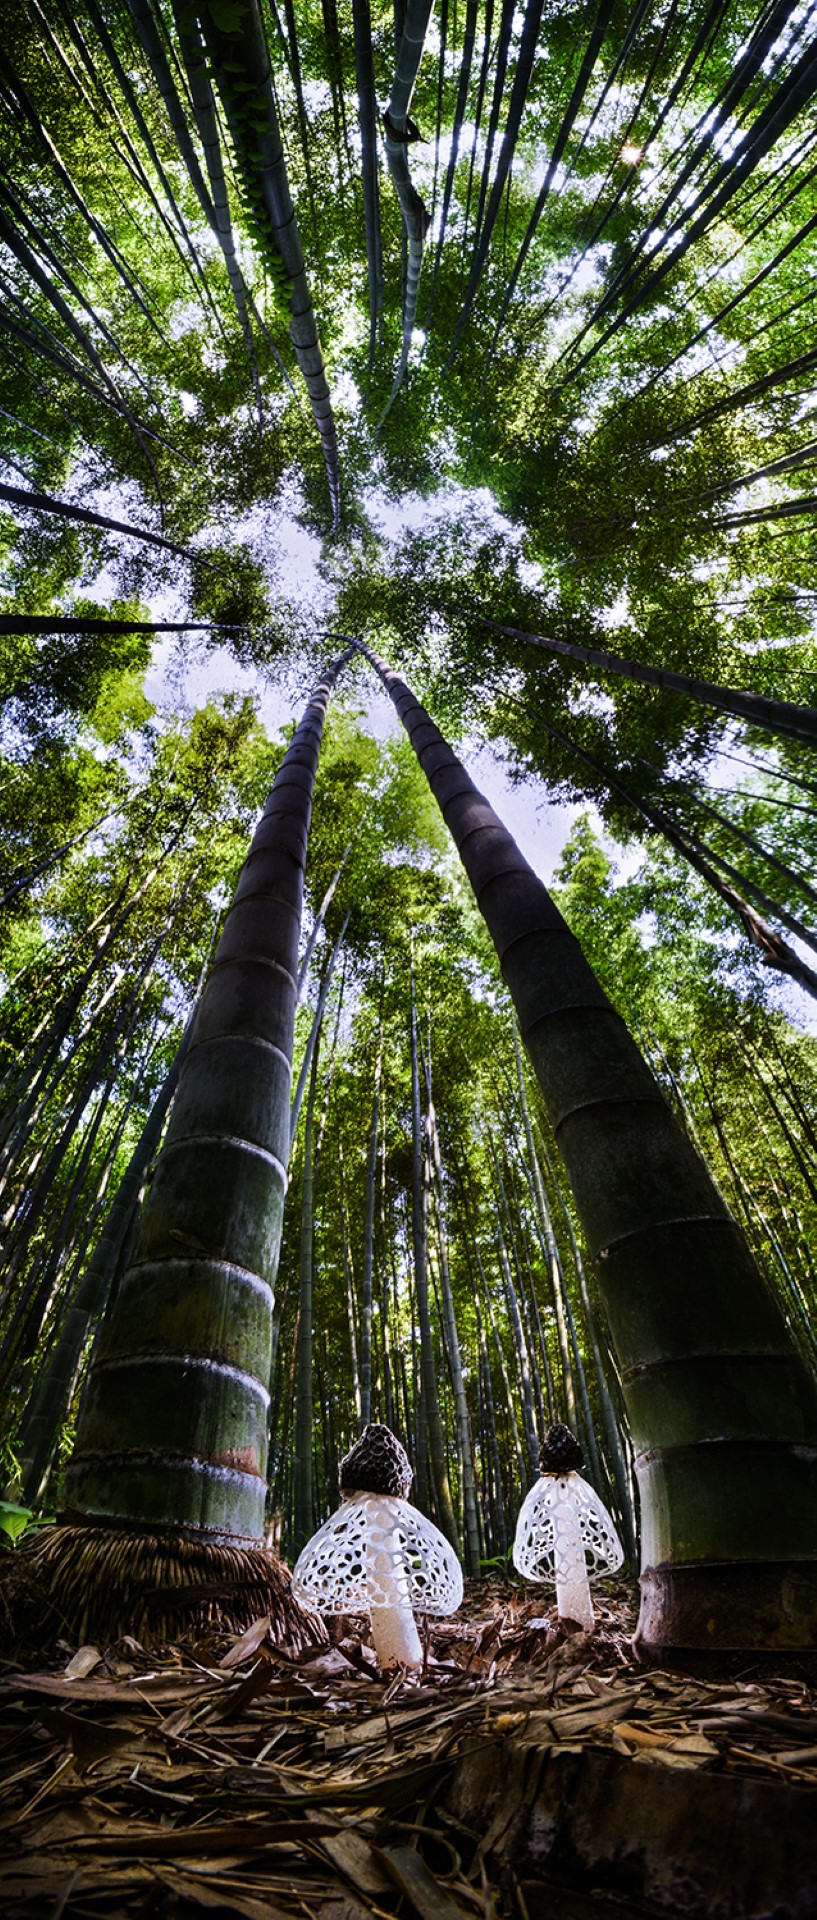 Spirits Of The Bamboo Forest 